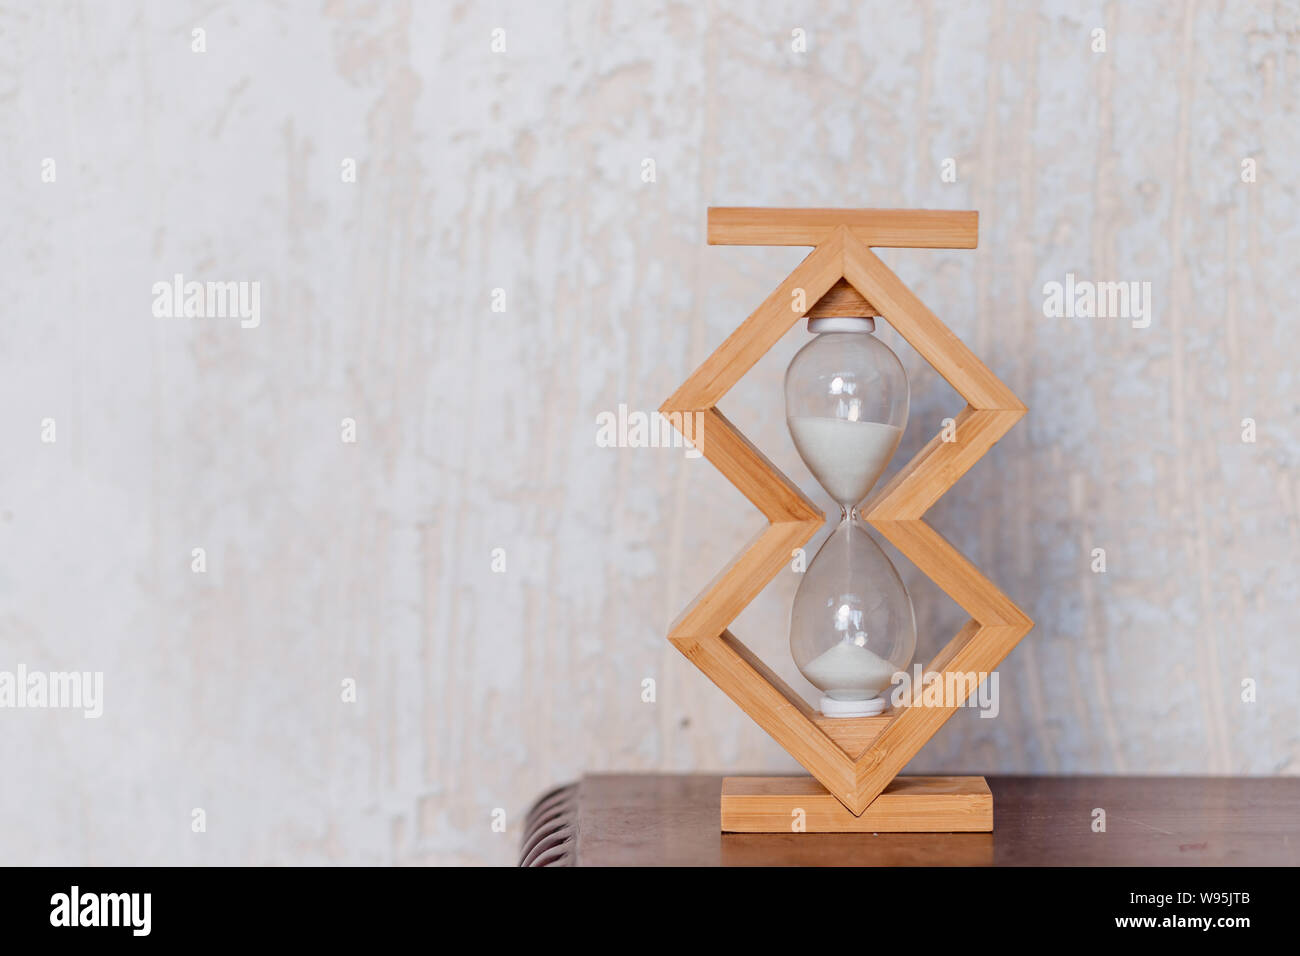 Close up of hourglass clock on a wooden floor with copy space. Hourglass time passing concept for business deadline, urgency and running out of time Stock Photo